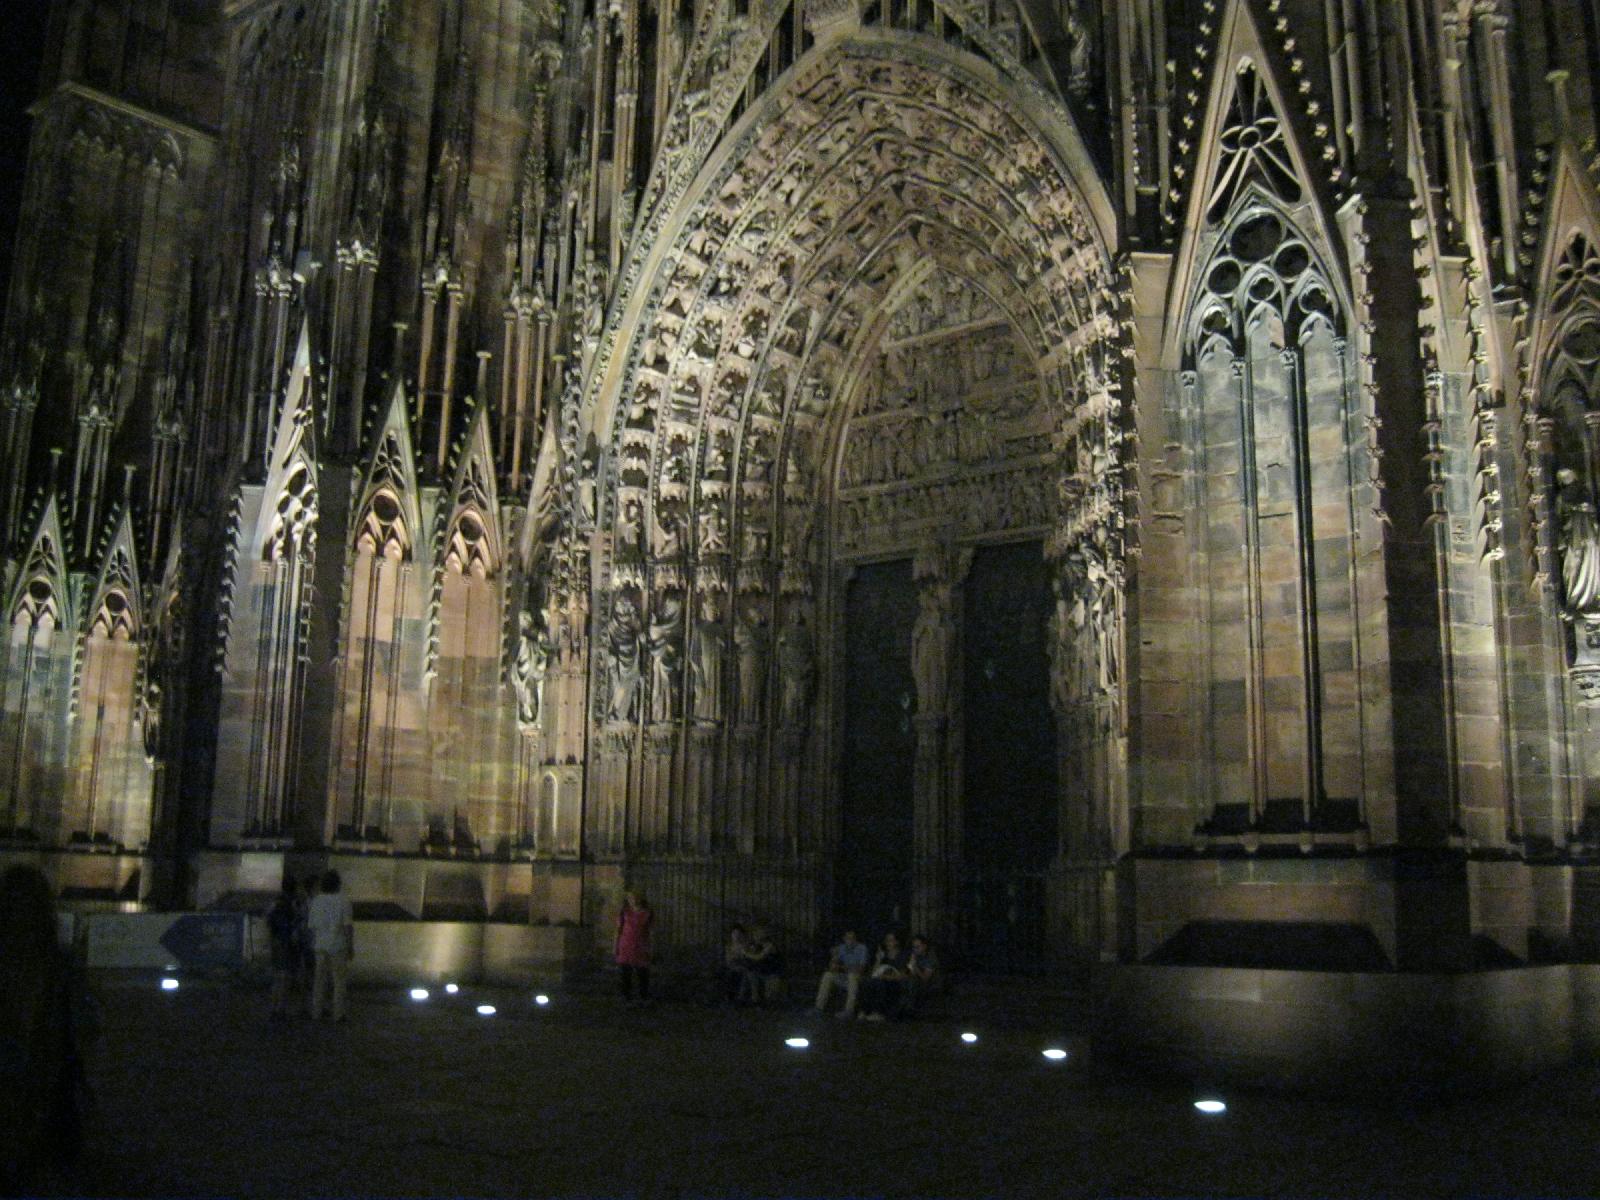 Cathedral entrance at night